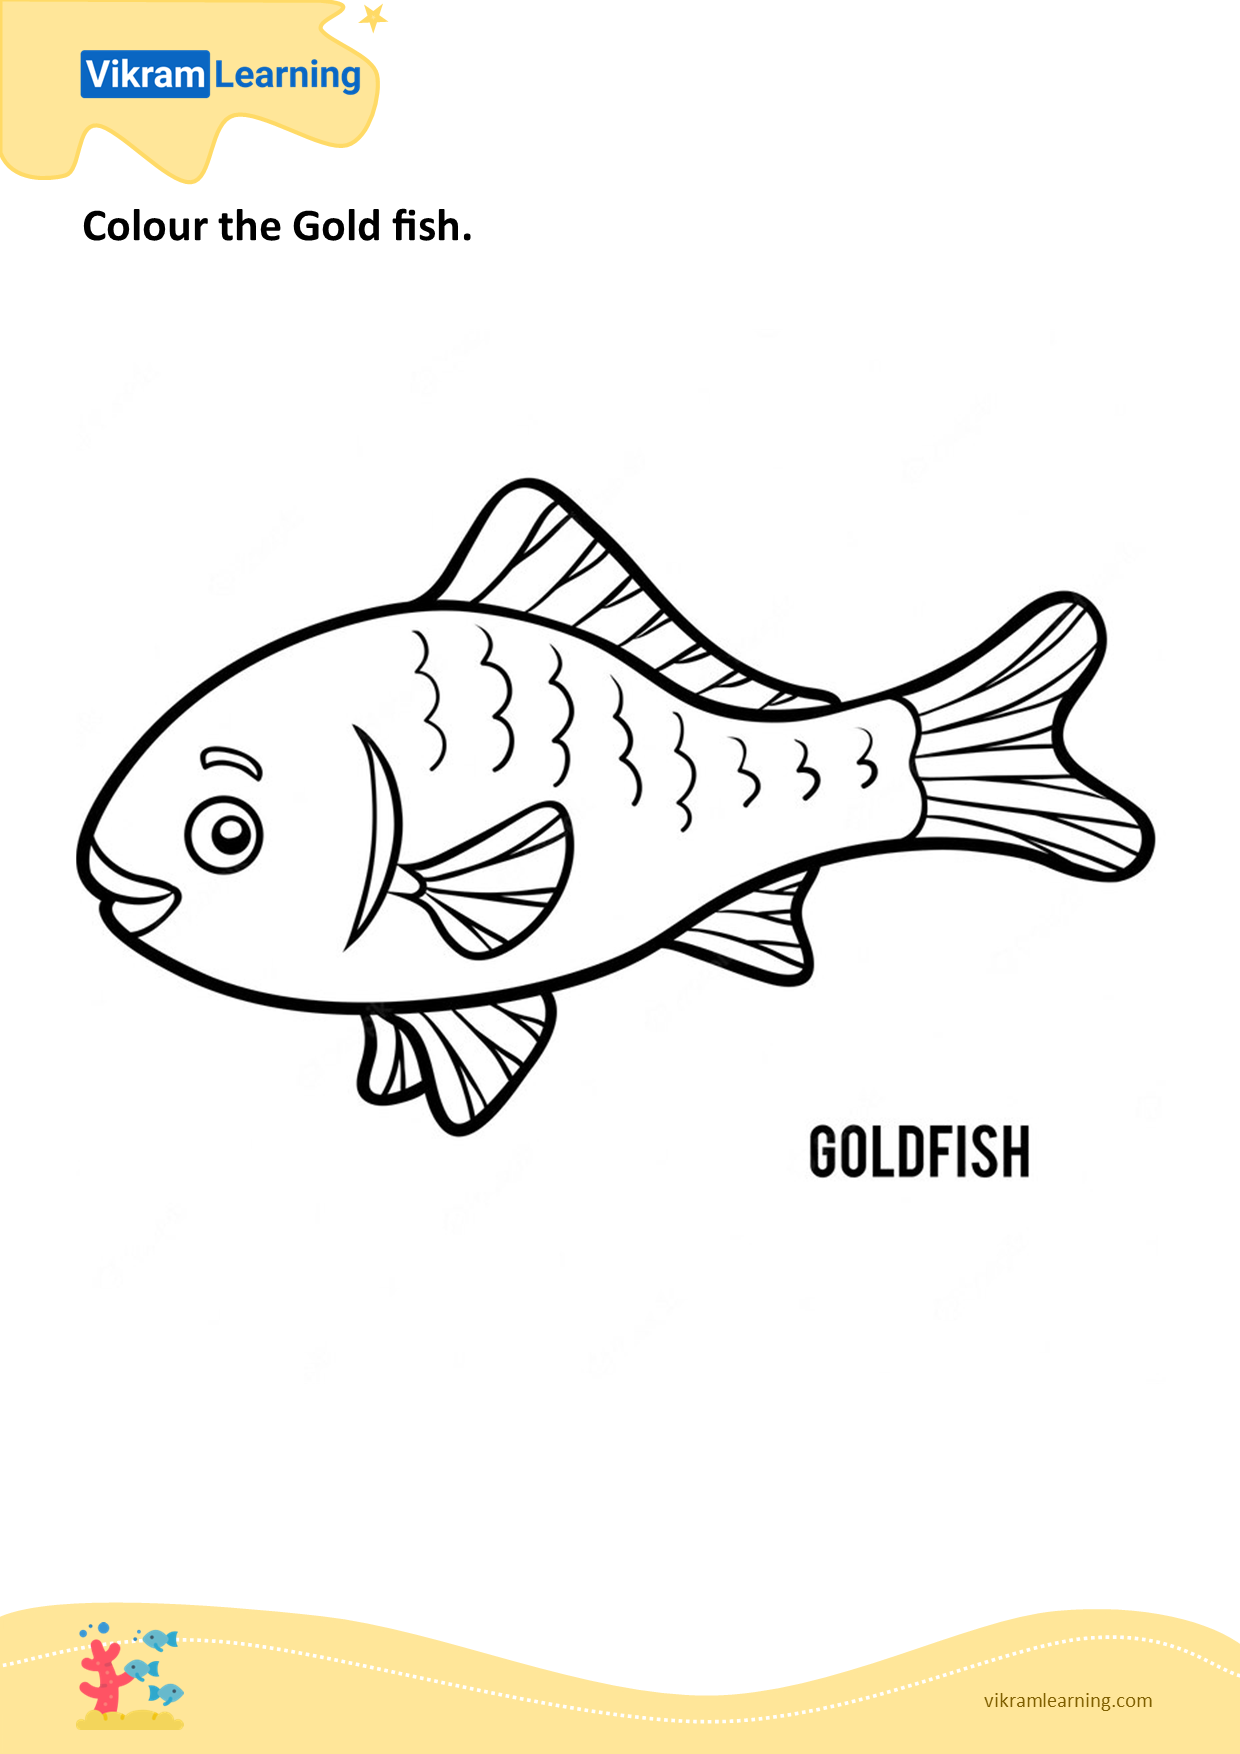 Download colour the gold fish worksheets